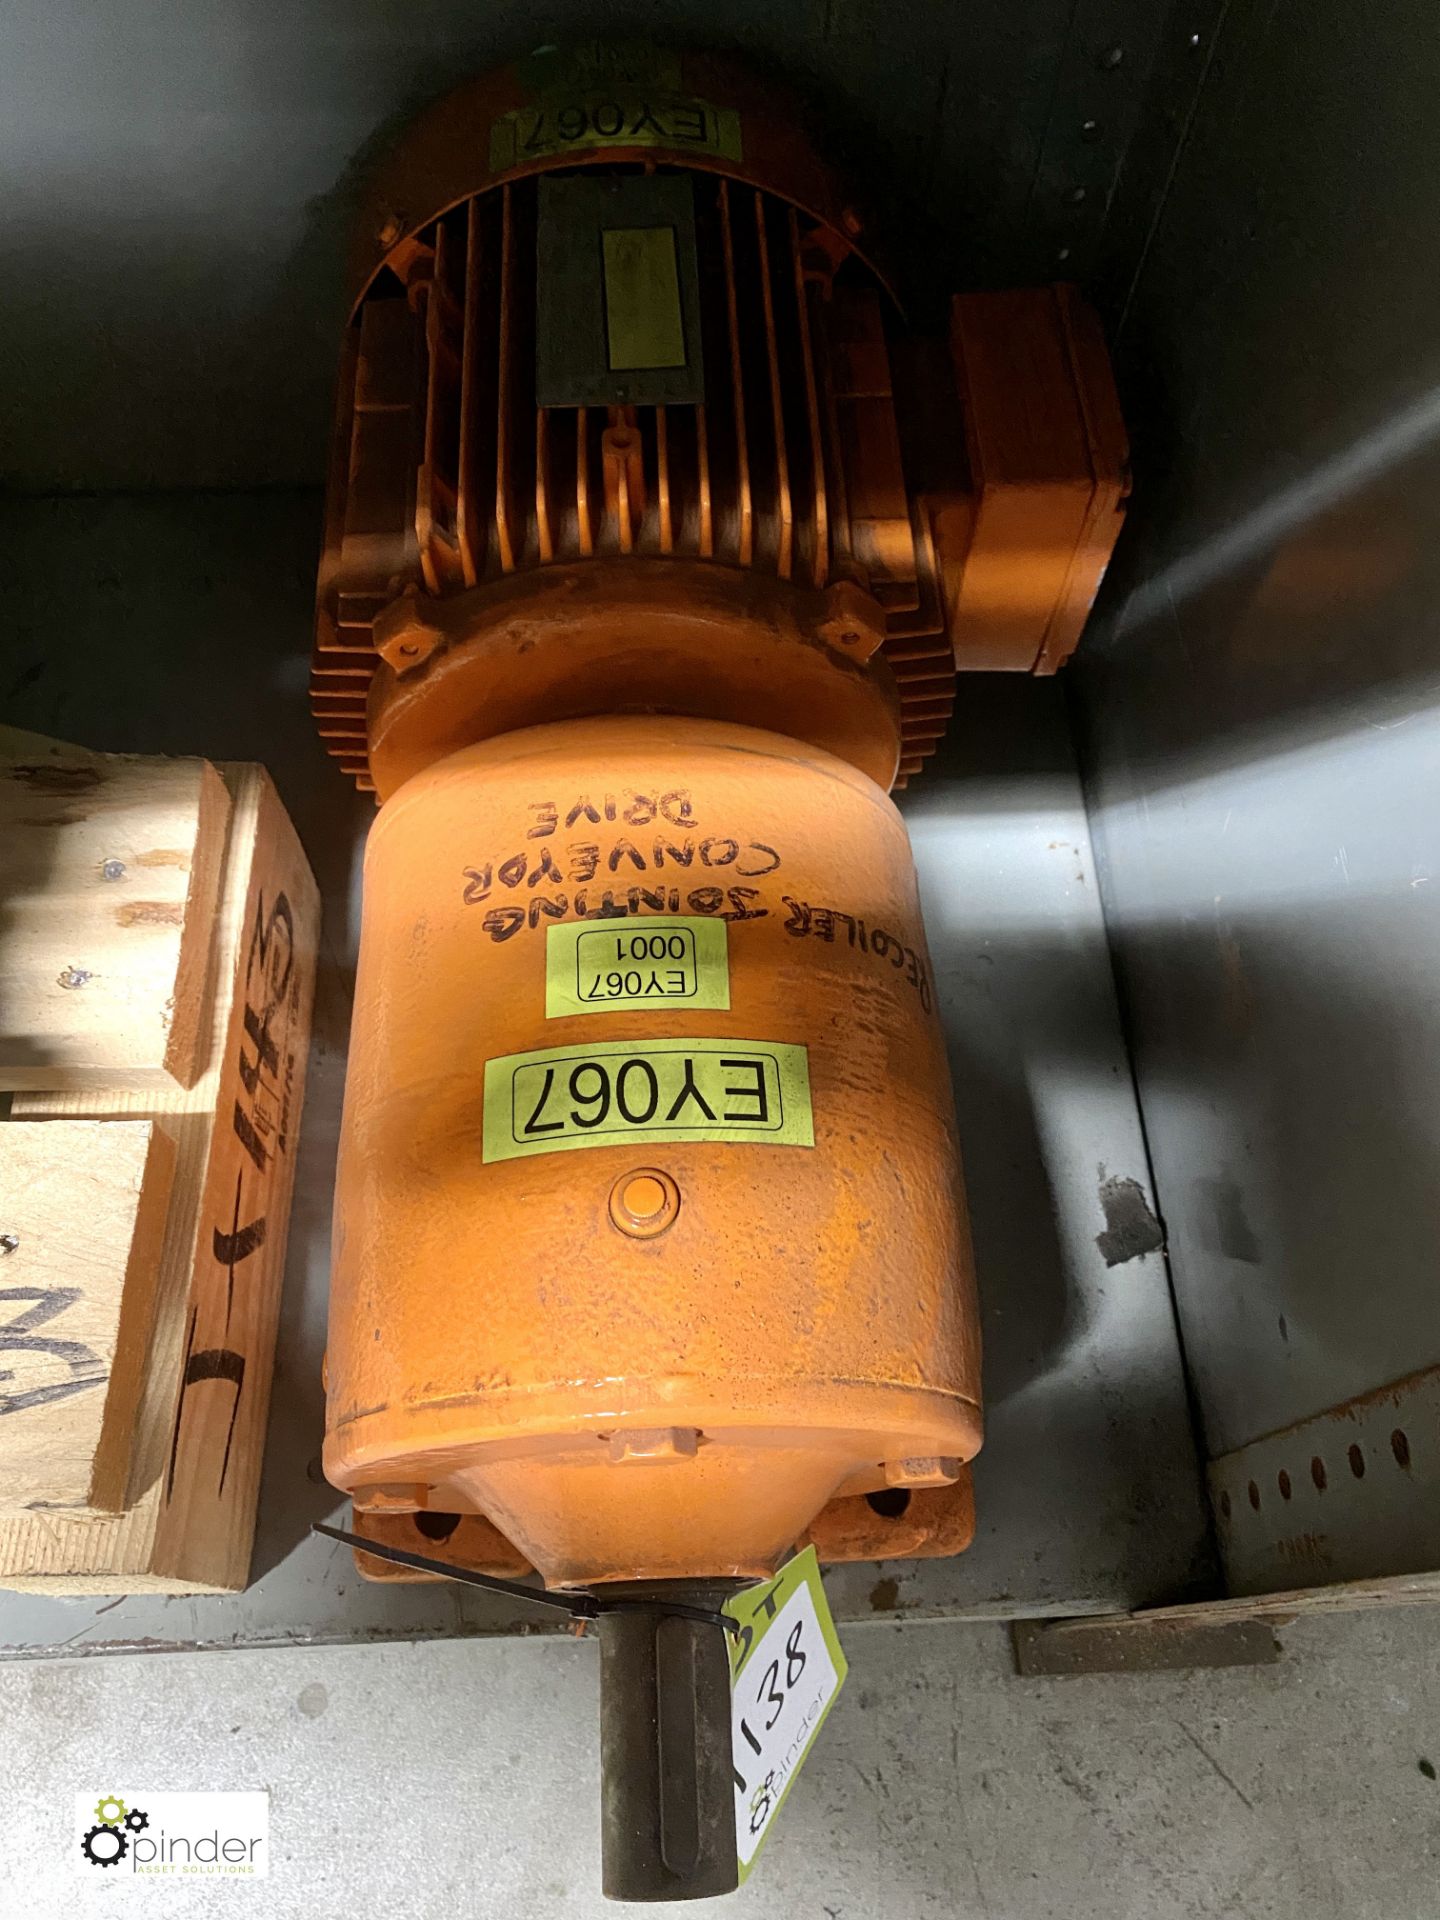 SEW Eurodrive R60DT90L4 Electric Motor and Gearbox